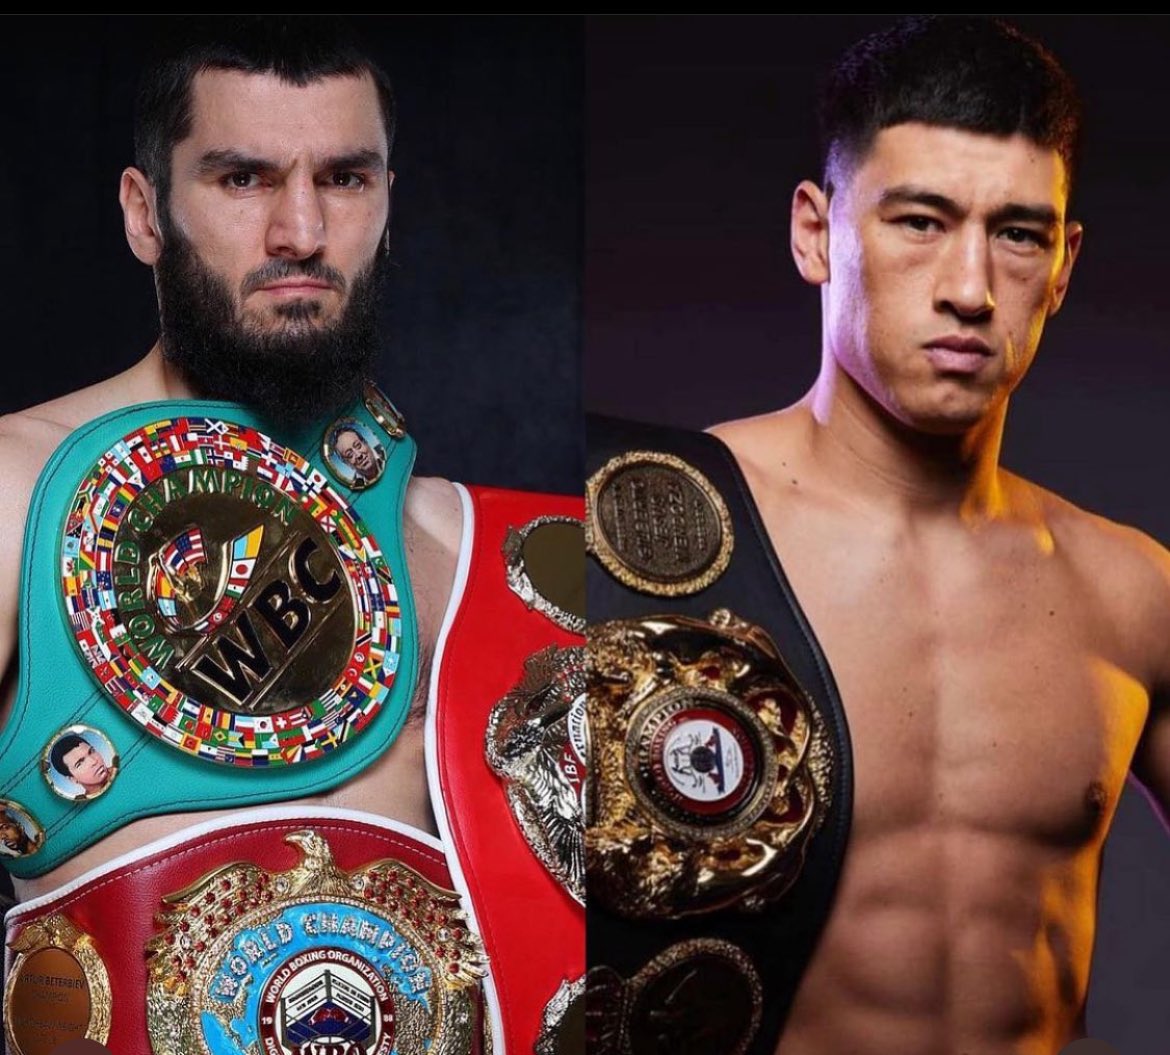 Can’t wait for this fight 🇷🇺🇷🇺🔥🔥
-
#boxing #BeterbievBivol